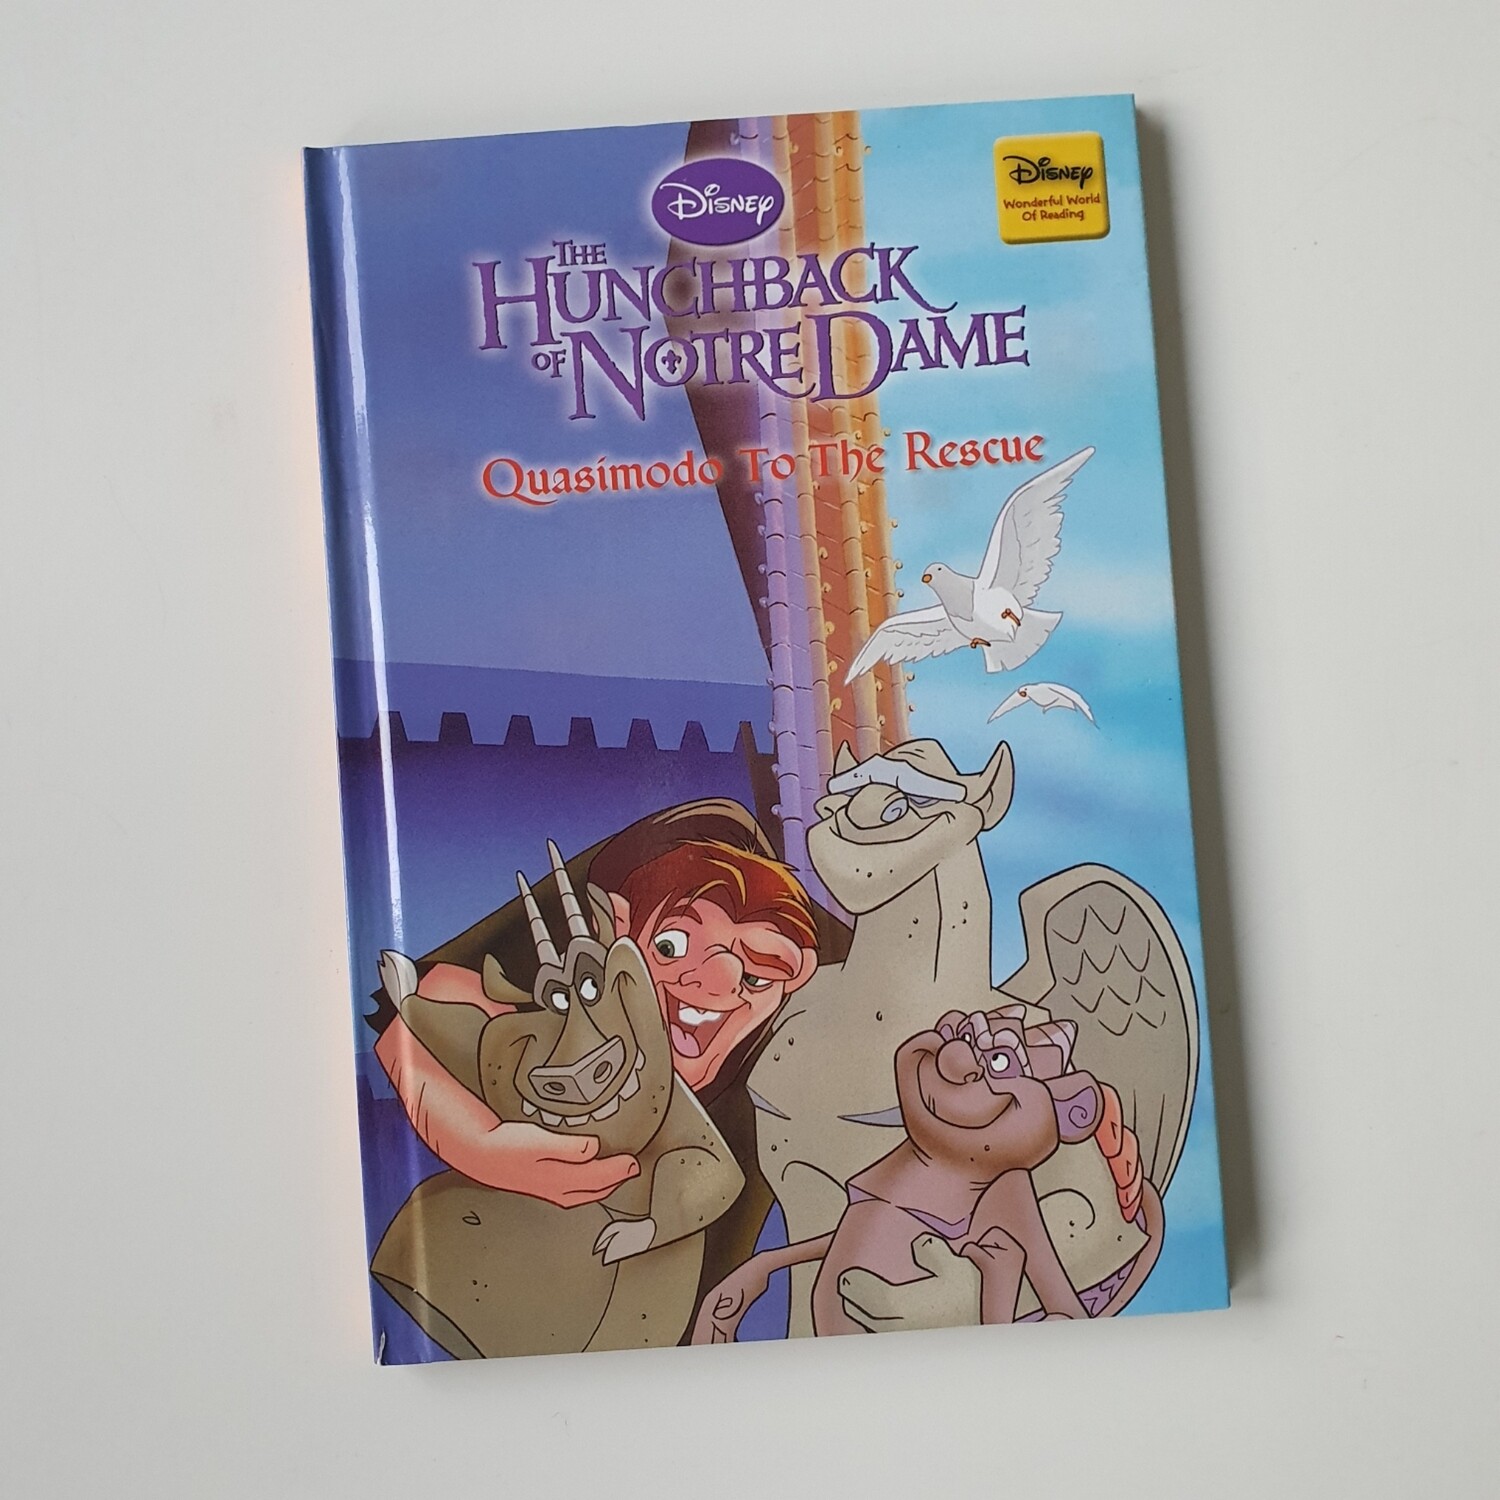 Hunchback of Notre Dame - Quasimodo to the Rescue  Notebook